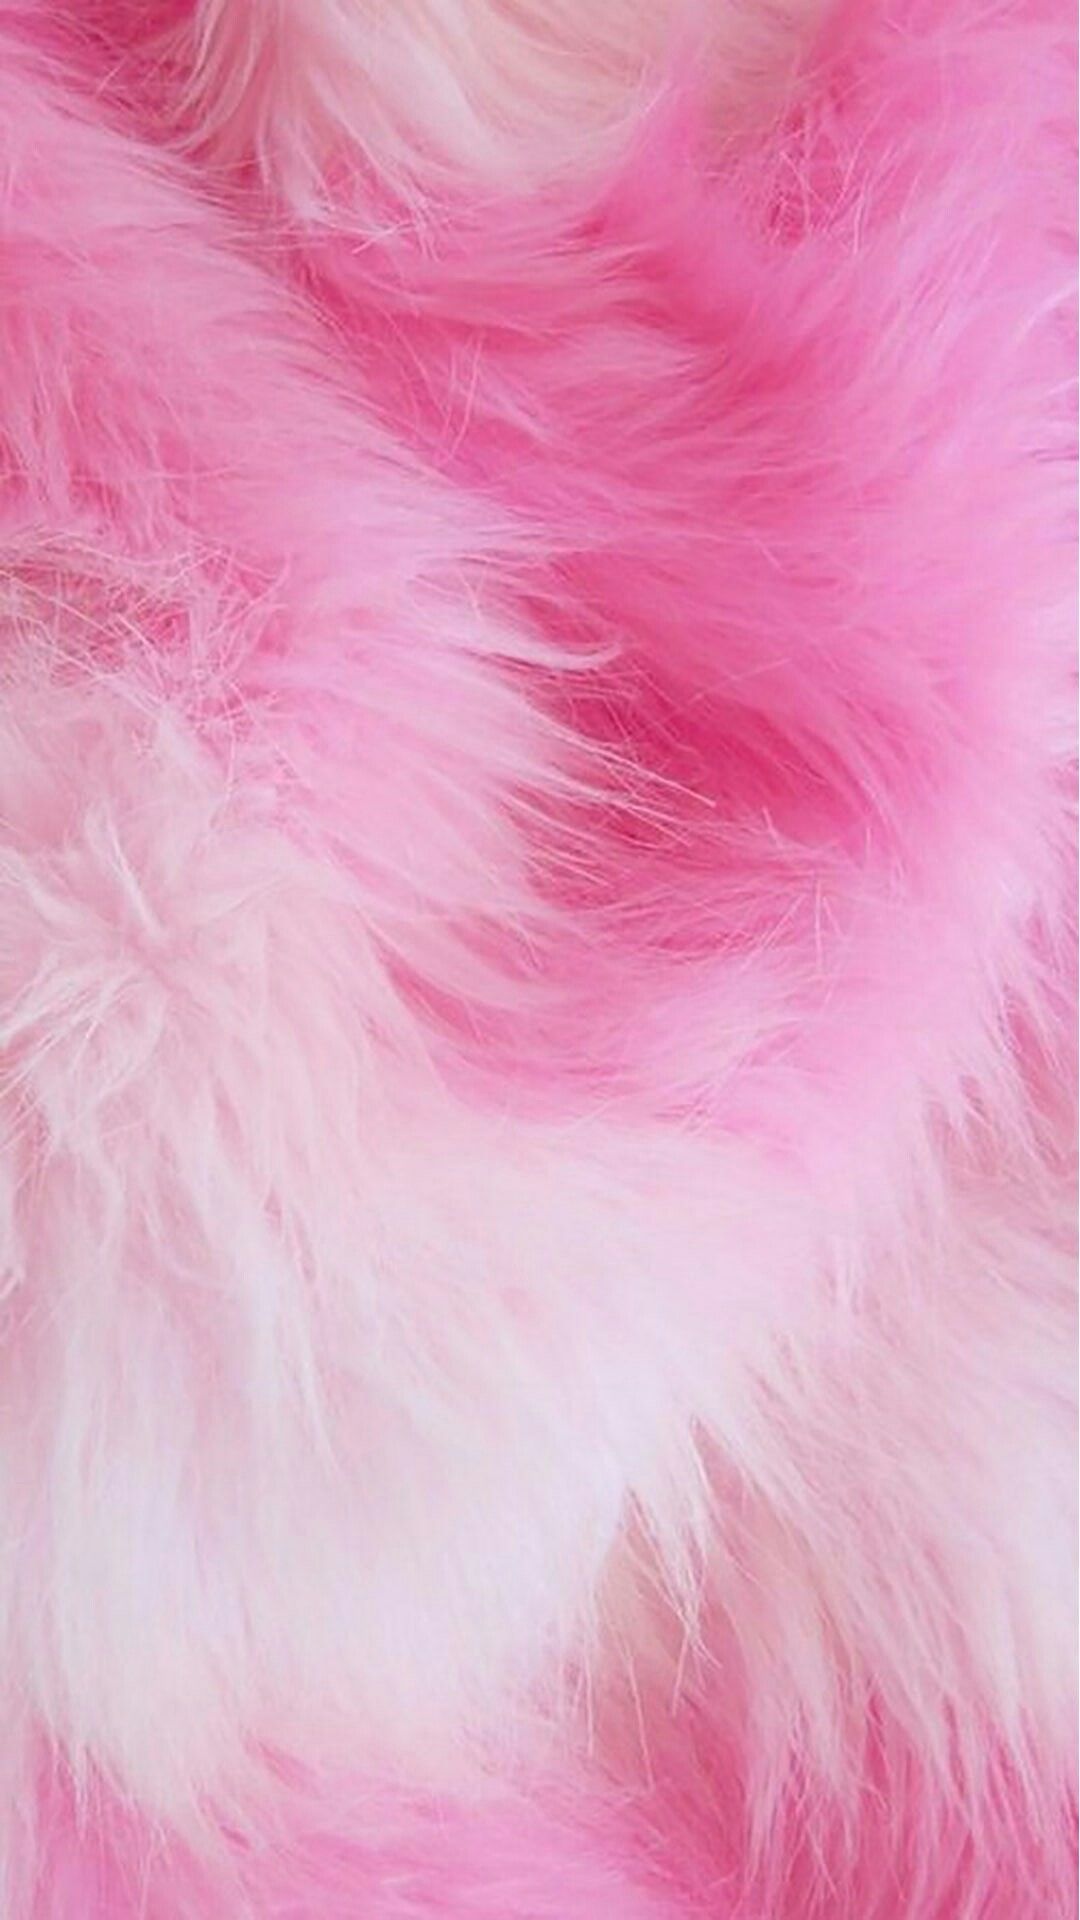 White furry wallpapers, Popular designs, Soft and cozy, Fuzzy texture, 1080x1920 Full HD Phone